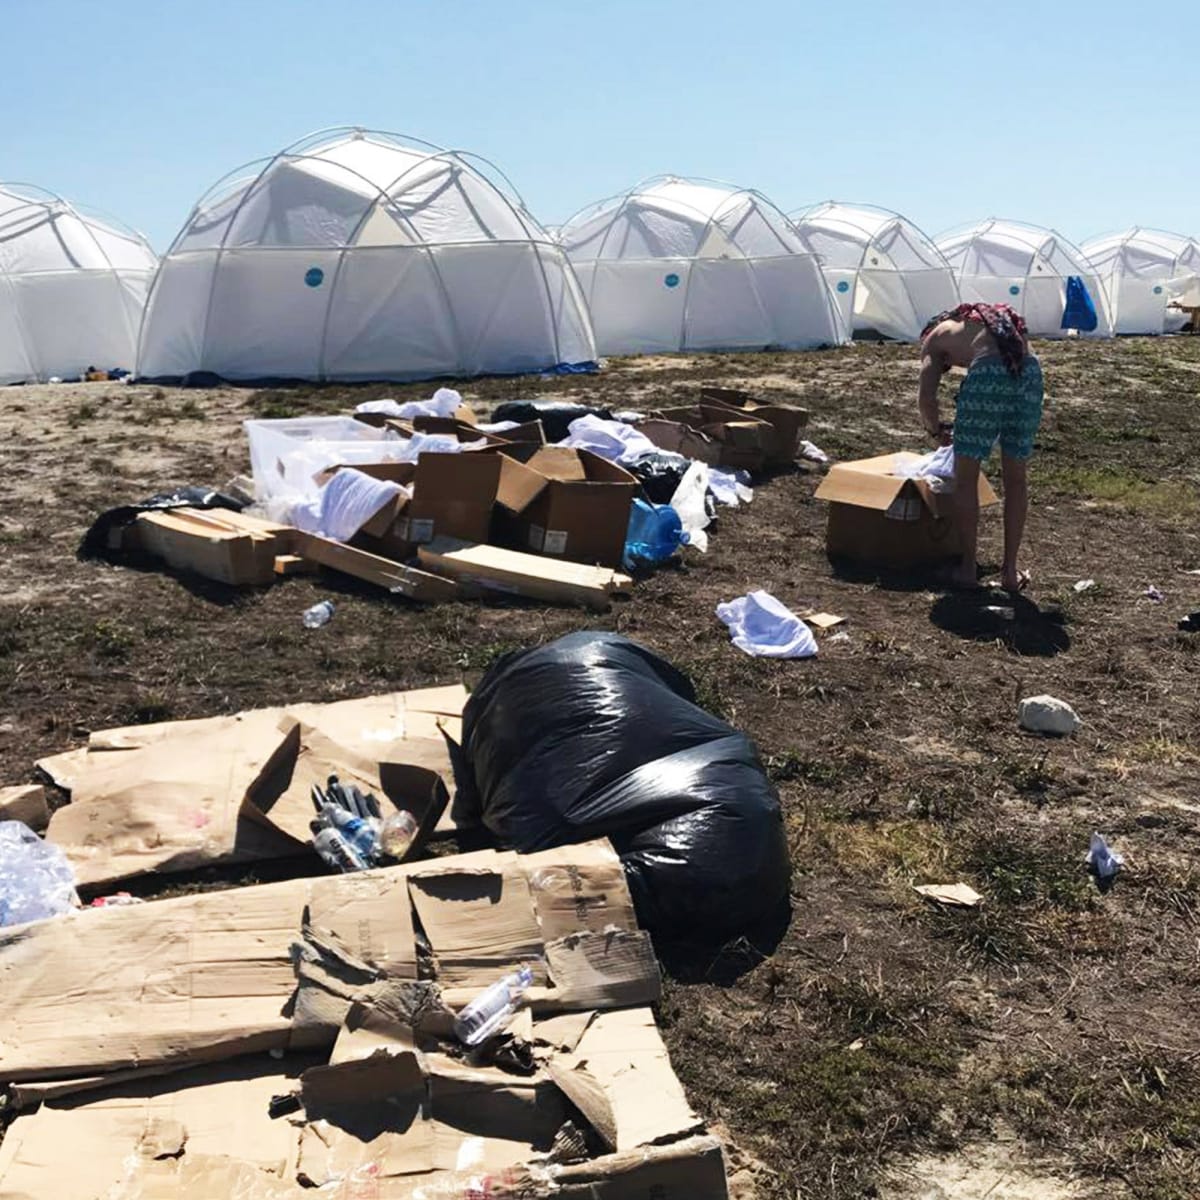 over hyped products and events  - Fyre Festival